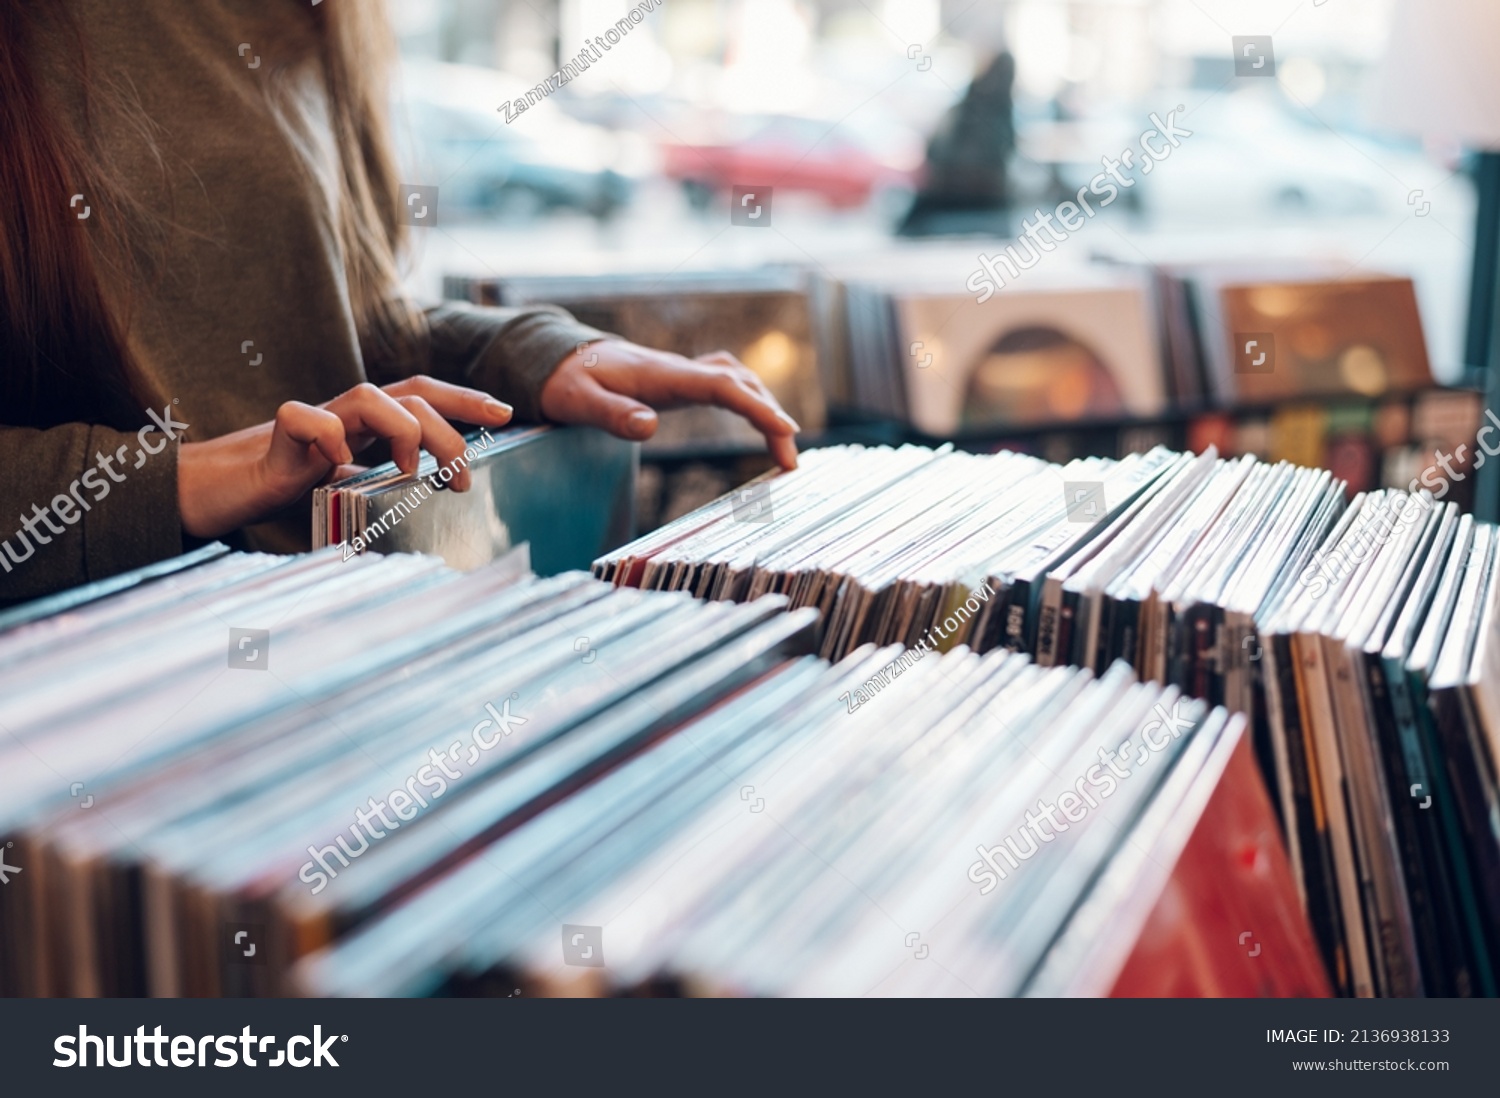 Close up of a woman hands choosing vinyl record in music record shop. Music addict concept. Old school classic concept. Focus on the hands and a vinyl record. #2136938133